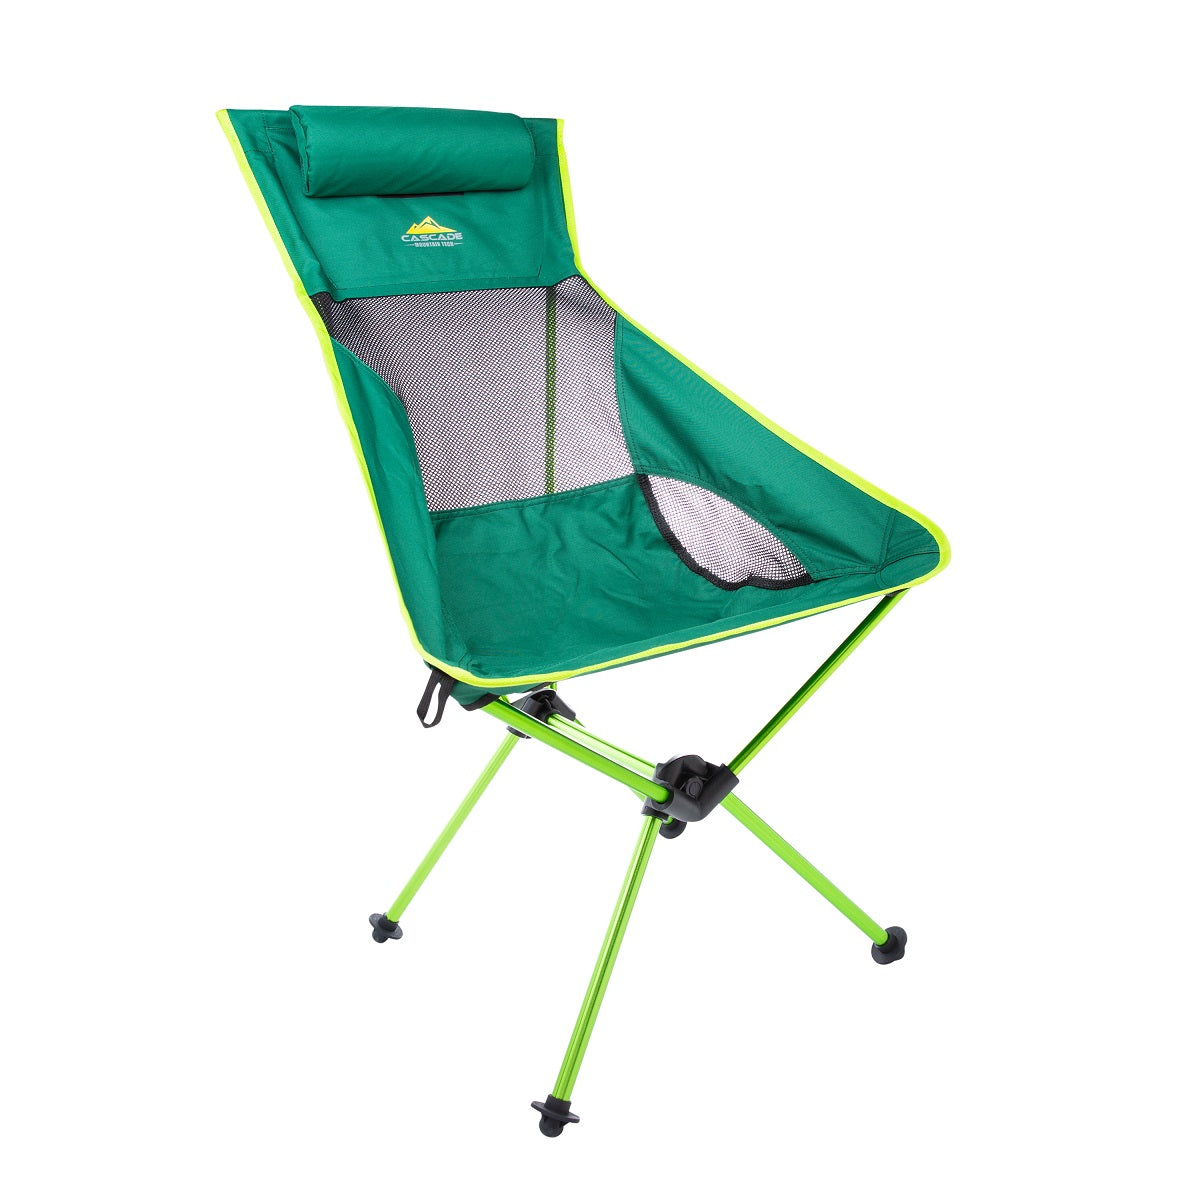 G4Free Lightweight Portable High Back Camping for Sale in